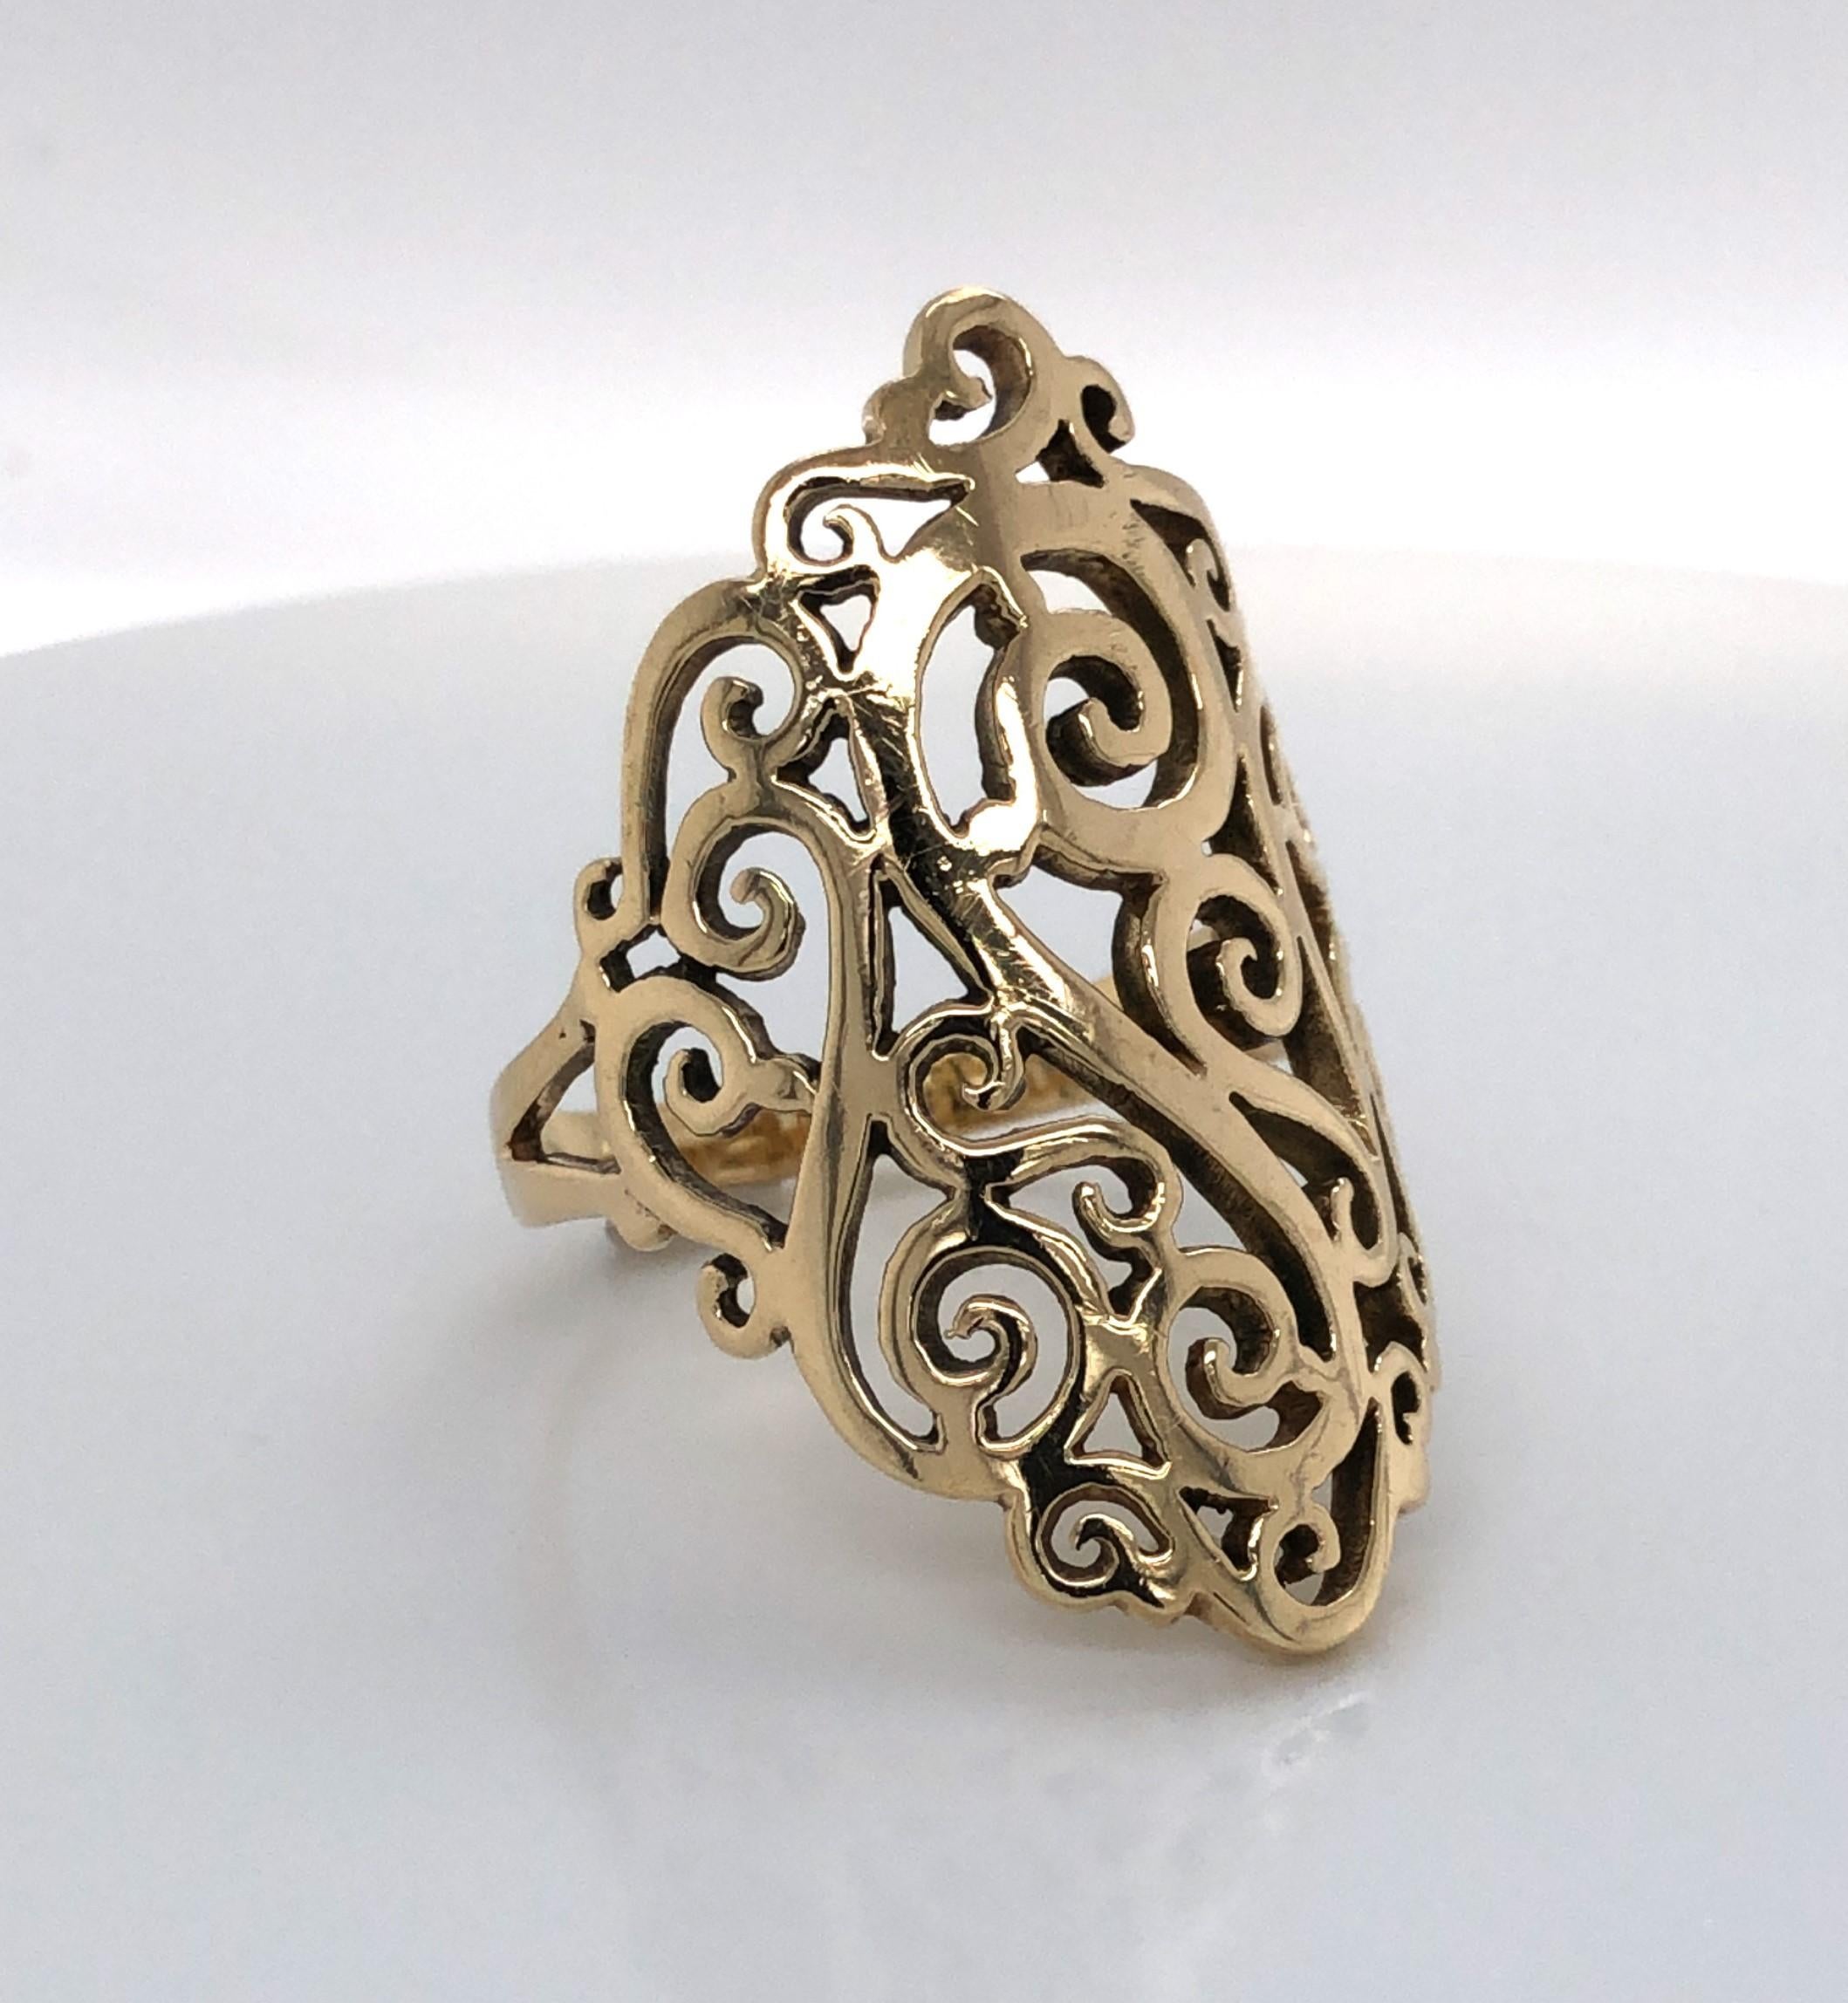 An intricate pierced scroll pattern in a marquise shape creates this artful cocktail ring in fourteen 14K yellow gold.  The shield  style ring measures 1-7/8 long by 7/8 inch wide and is stamped 
stamped 14K. In ring size 10-3/4 and is resizable.